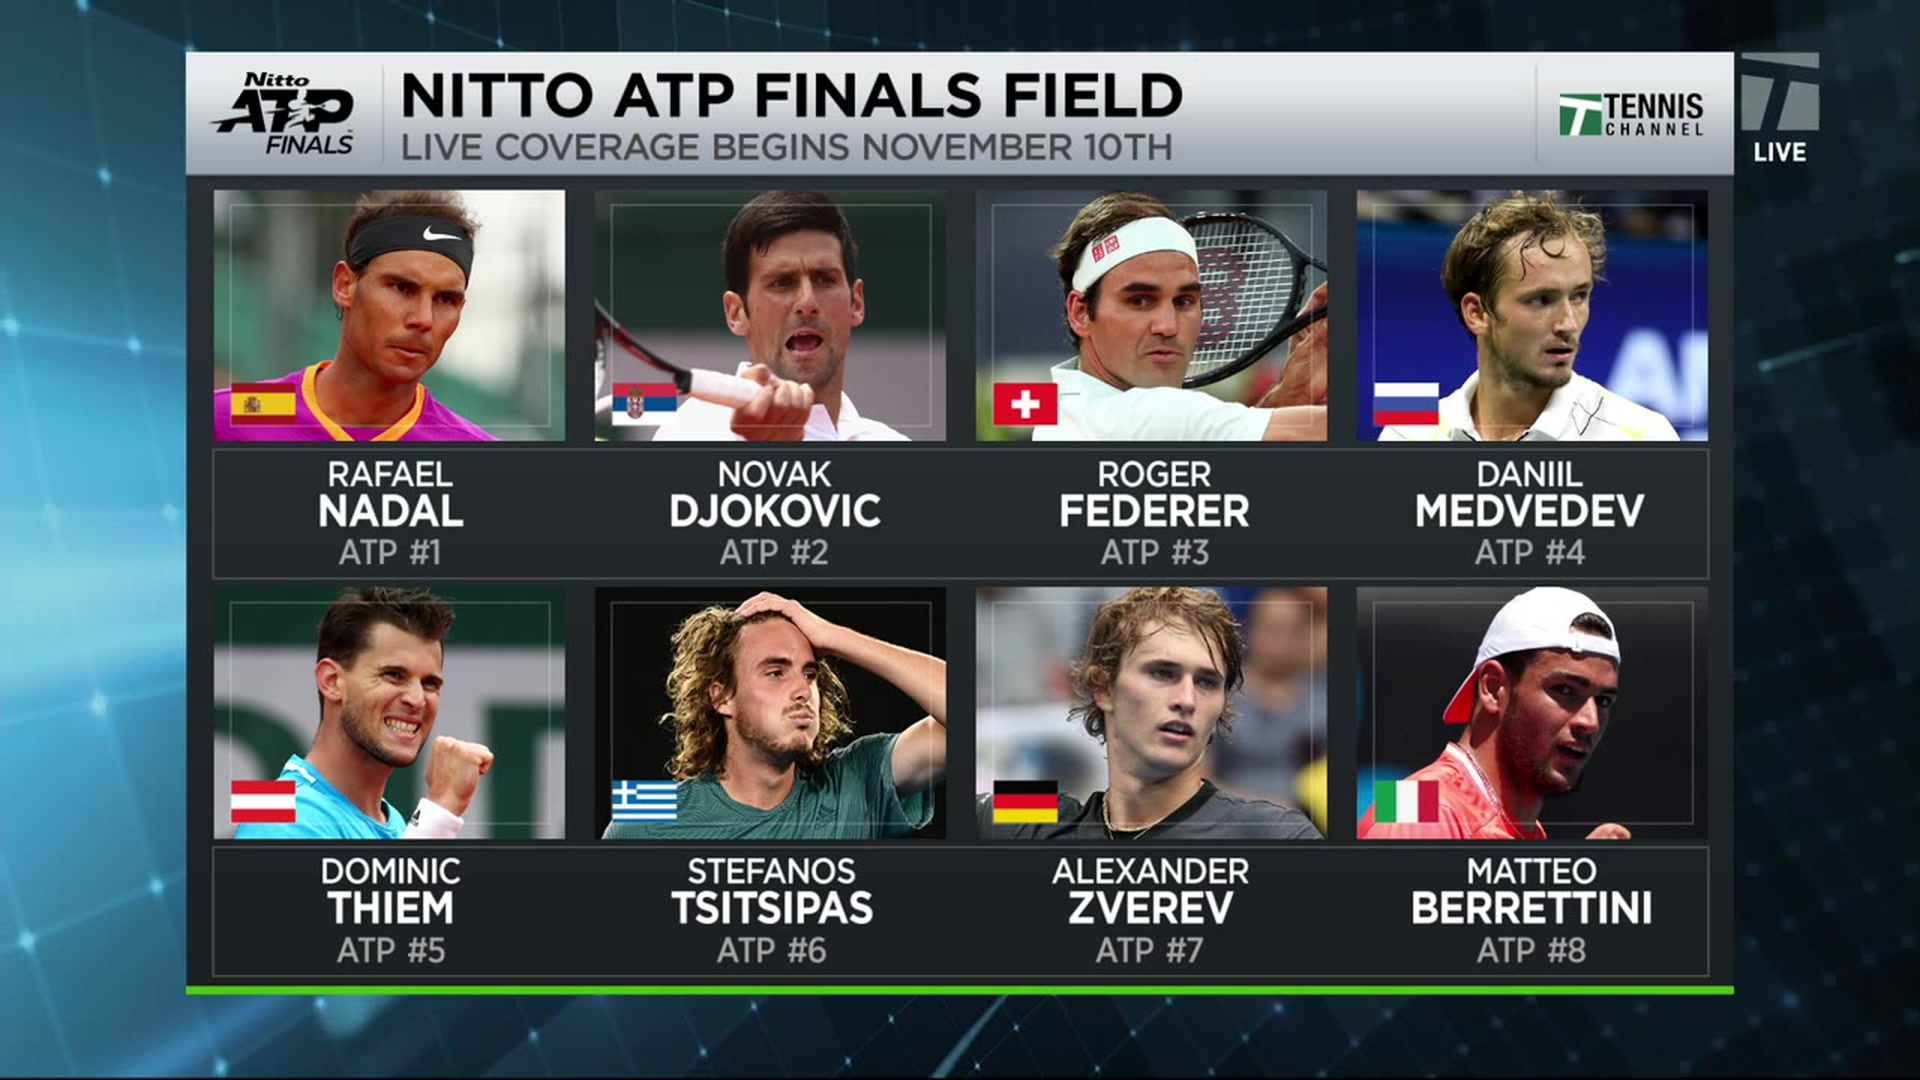 Ten things you must know about next weeks Nitto ATP Finals in London